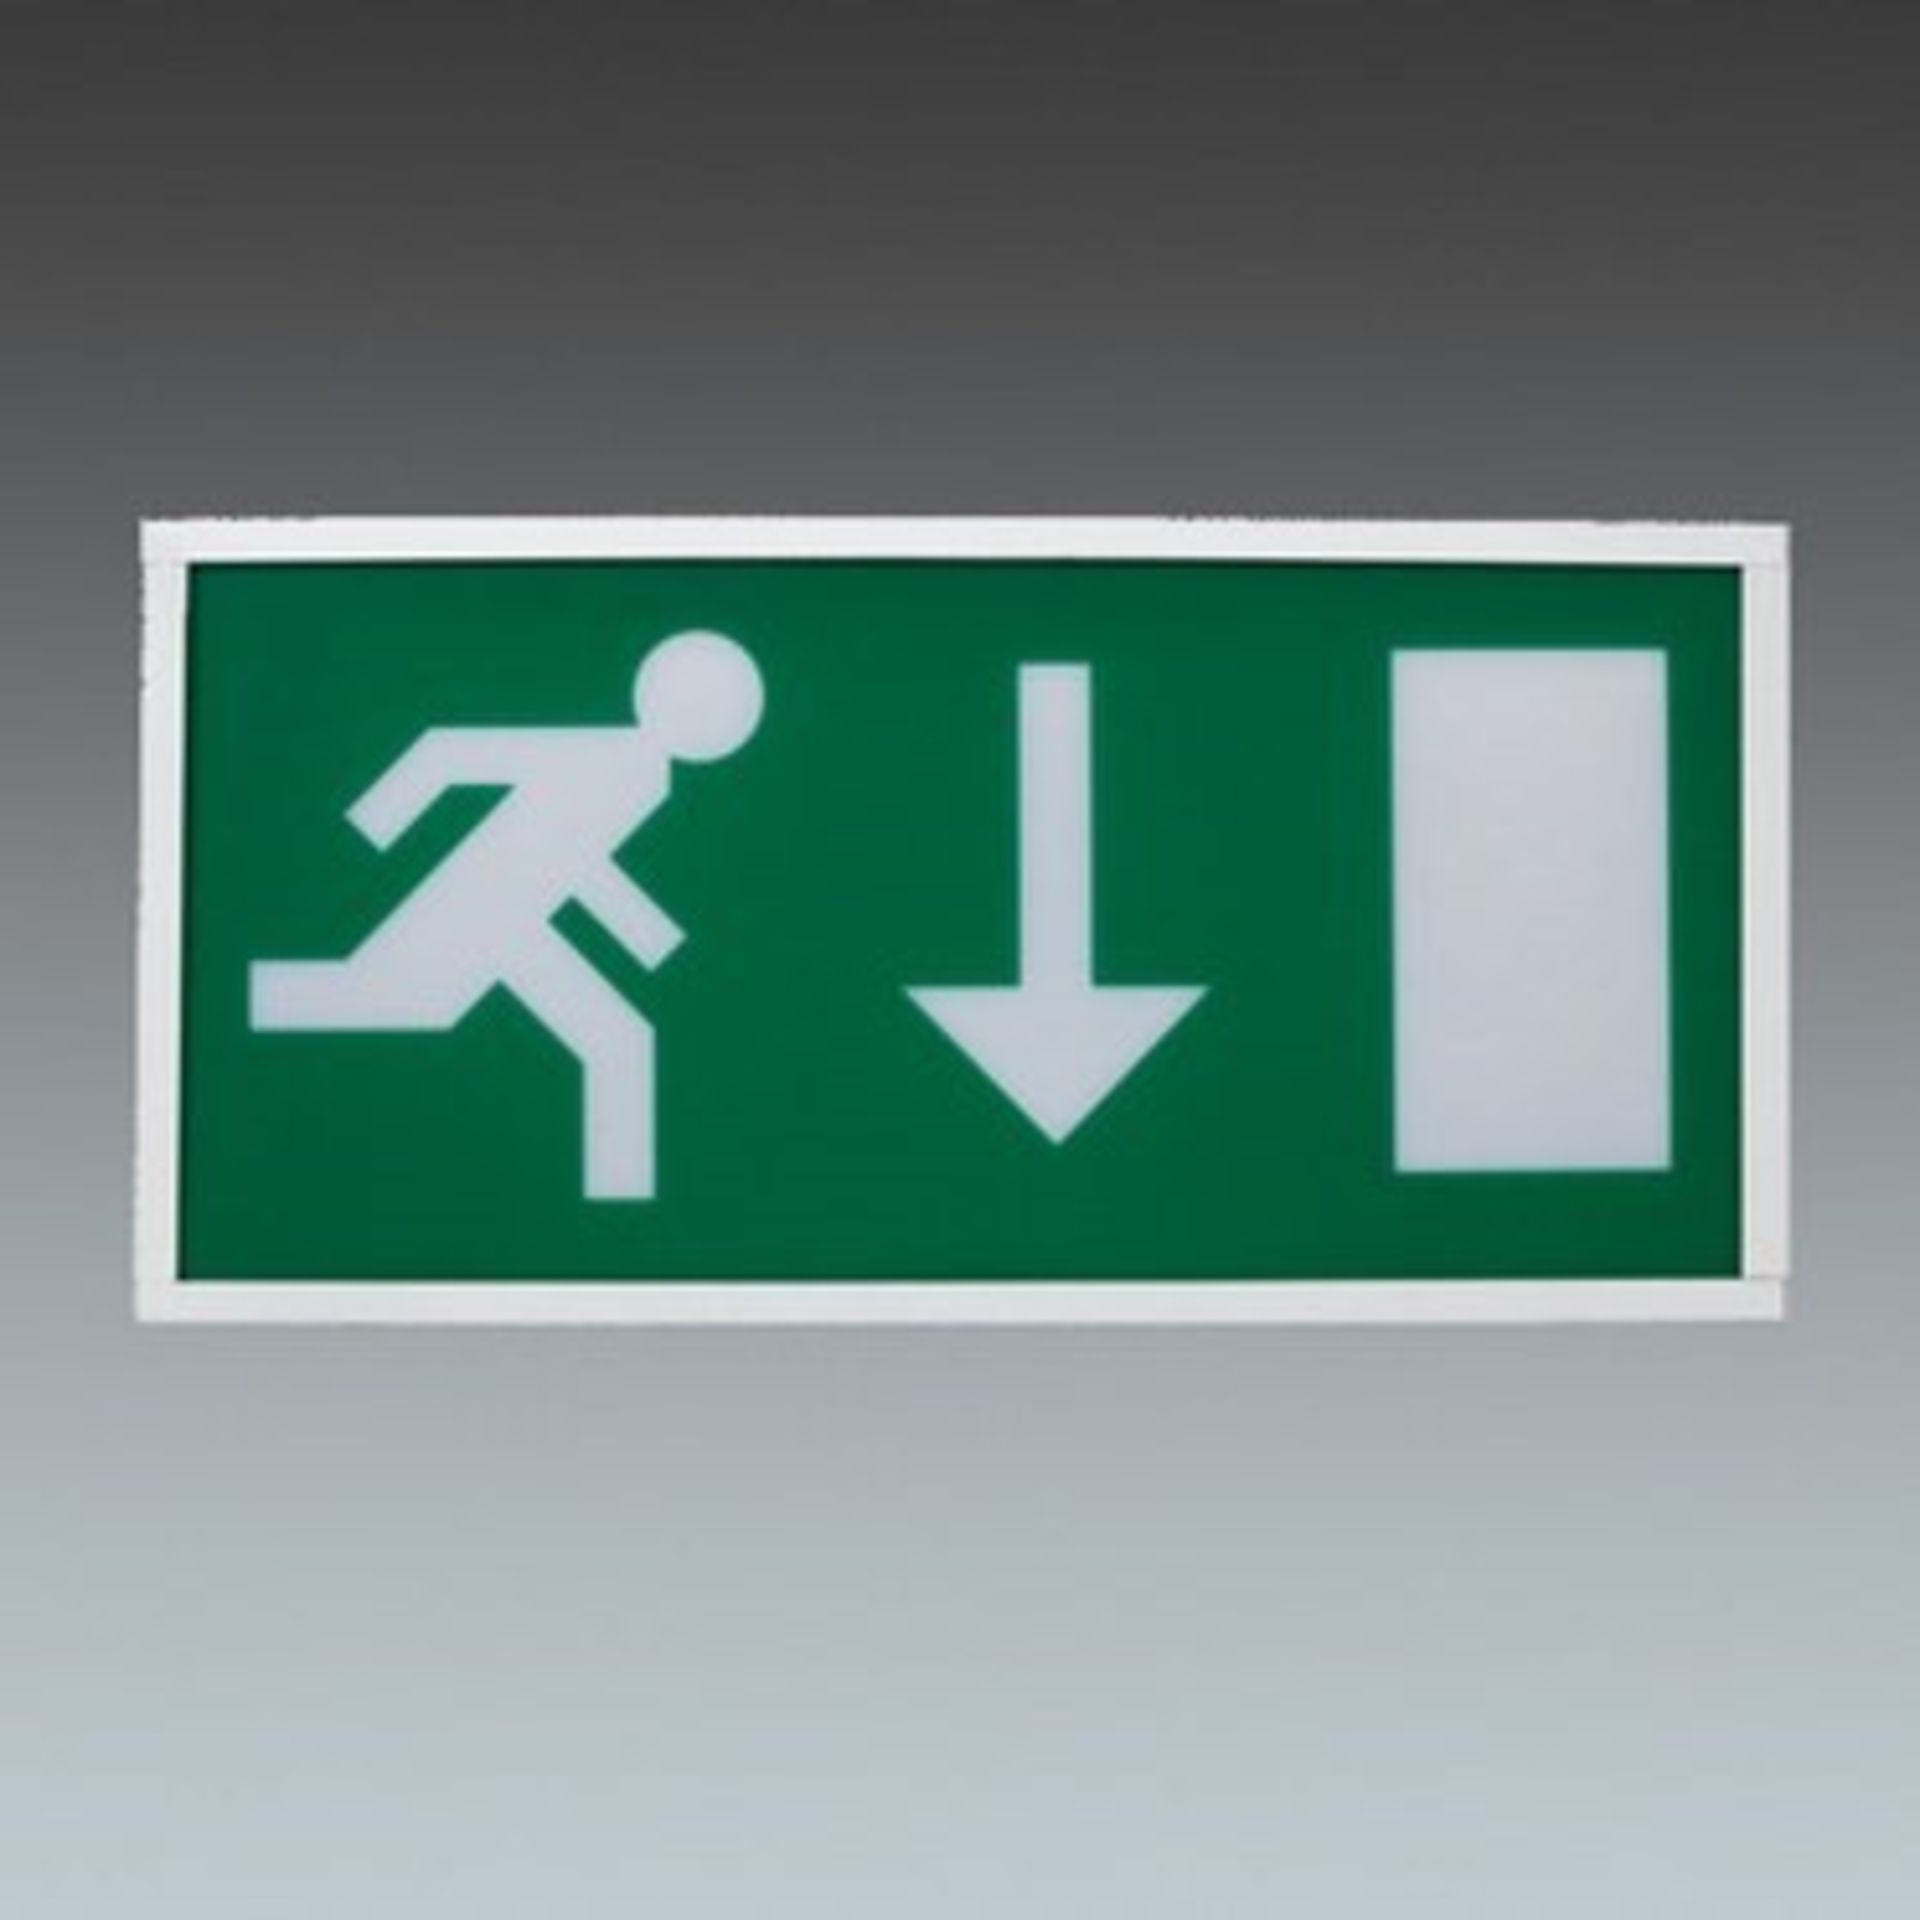 1 x THORN Voyager E Exit Sign - Model E3m - CL150 - Unused, Boxed Stock - Ref: HOT072 - Location: - Image 4 of 10